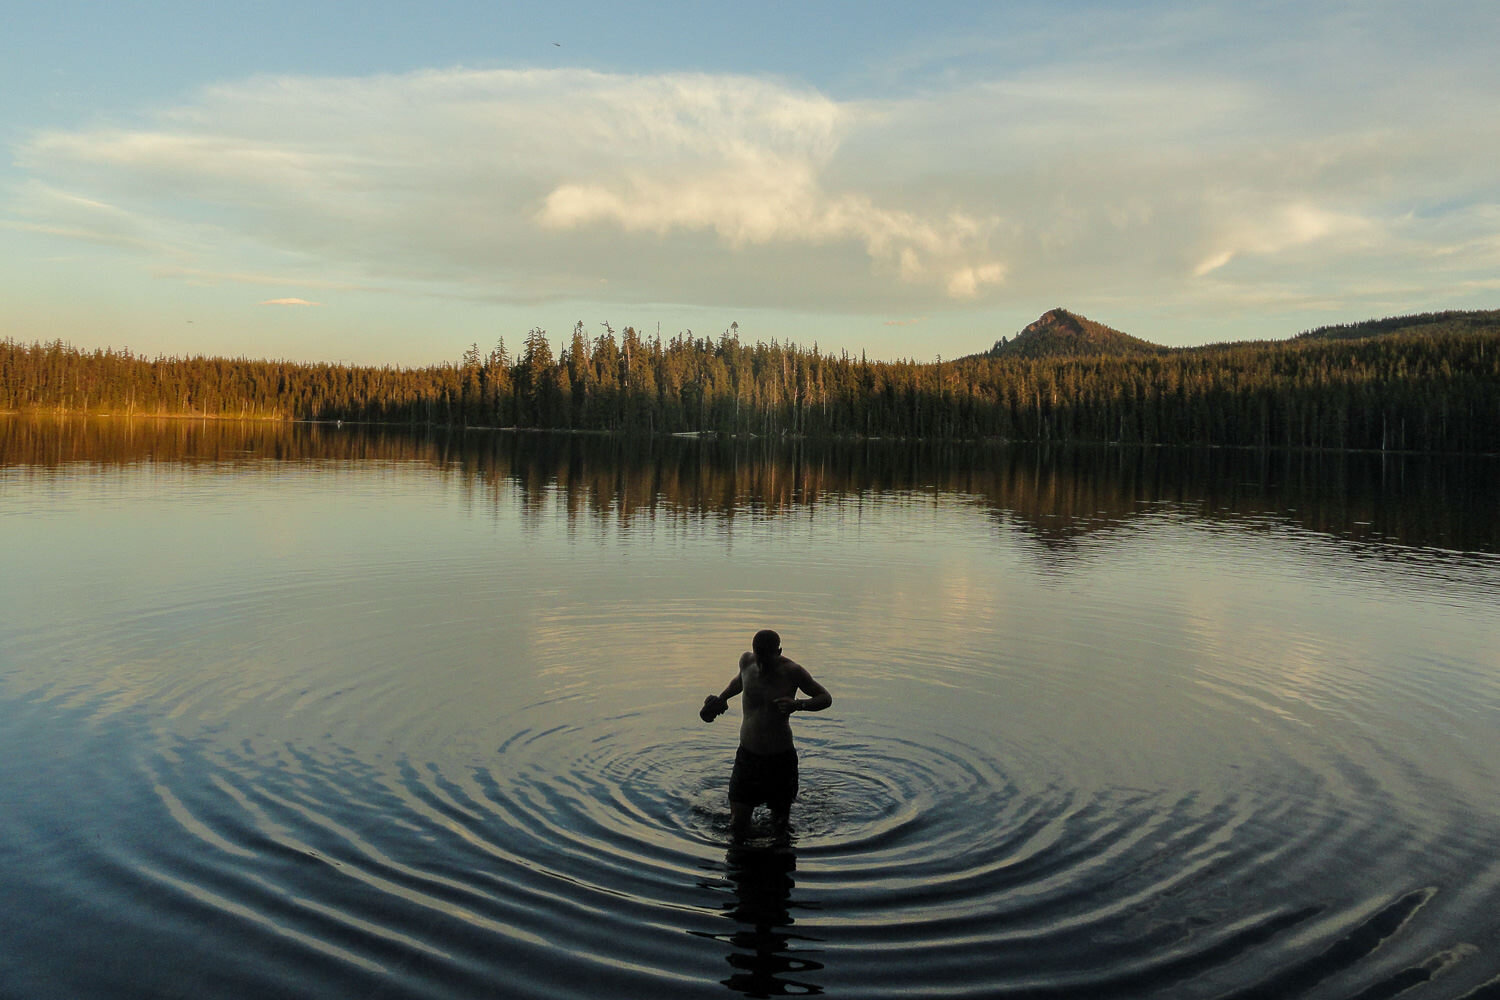 A hiker takes a well-deserved evening dip in one of oregon’s Cascade lakes